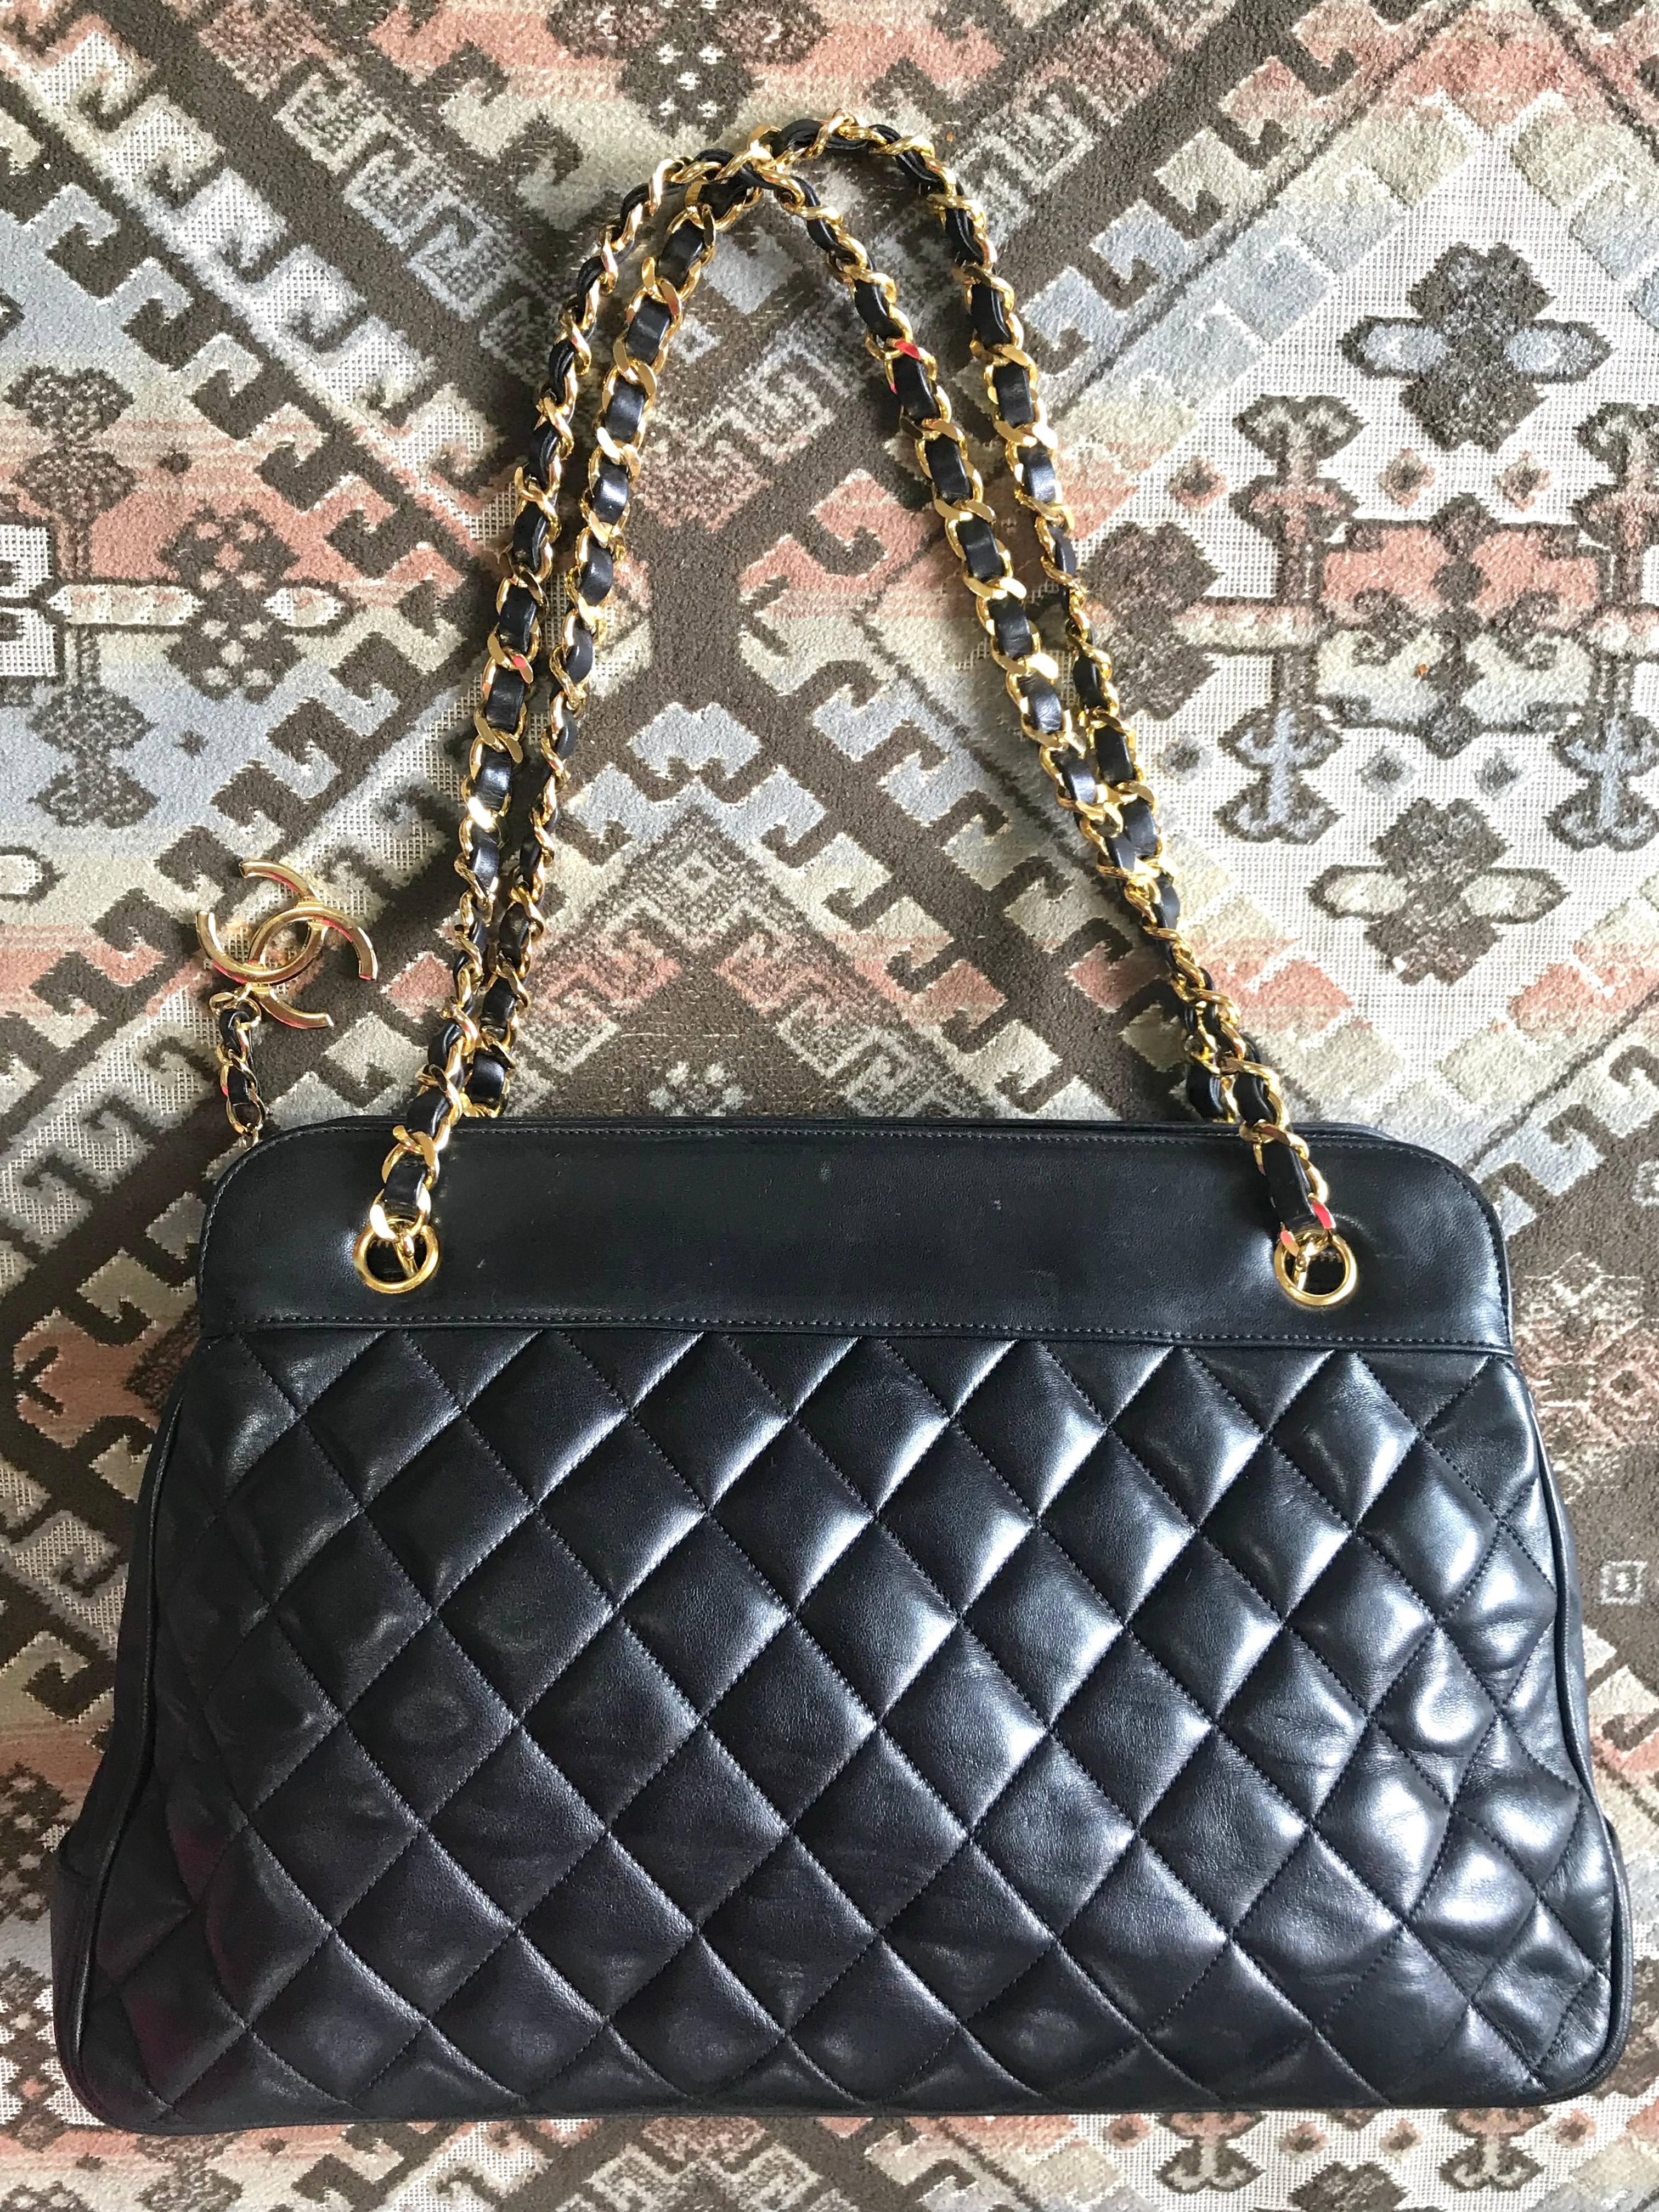 1980-1990s. Vintage CHANEL black lambskin large tote bag with gold tone chains and jumbo CC charm to the LAMPO zipper. Classic purse.

Vintage CHANEL black lambskin large trapezoid shape shoulder bag with gold tone chains and jumbo CC charm to the